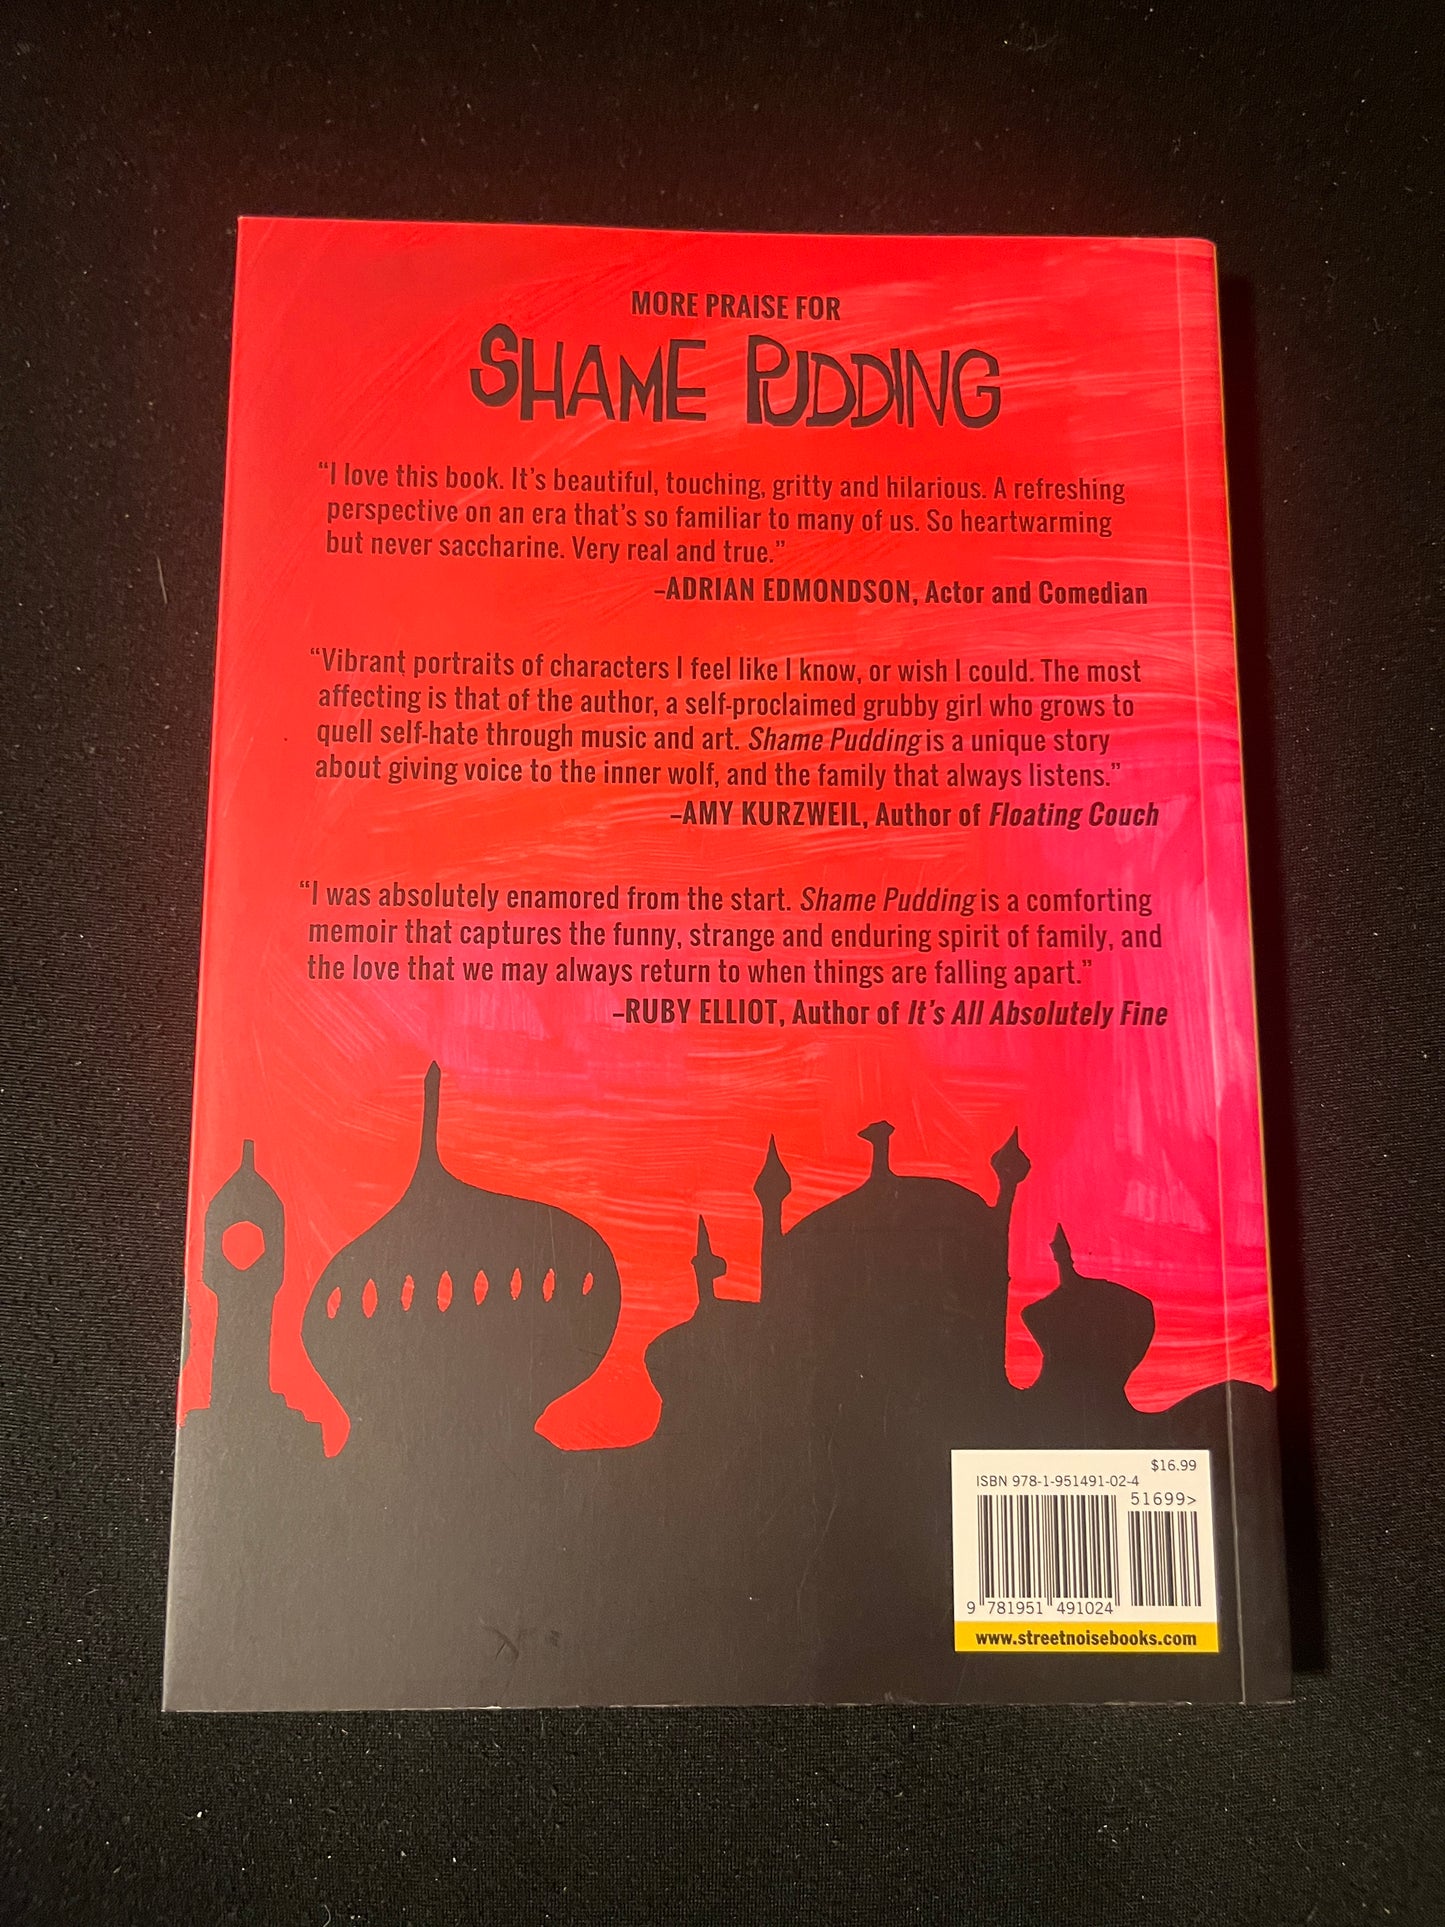 SHAME PUDDING by Danny Noble